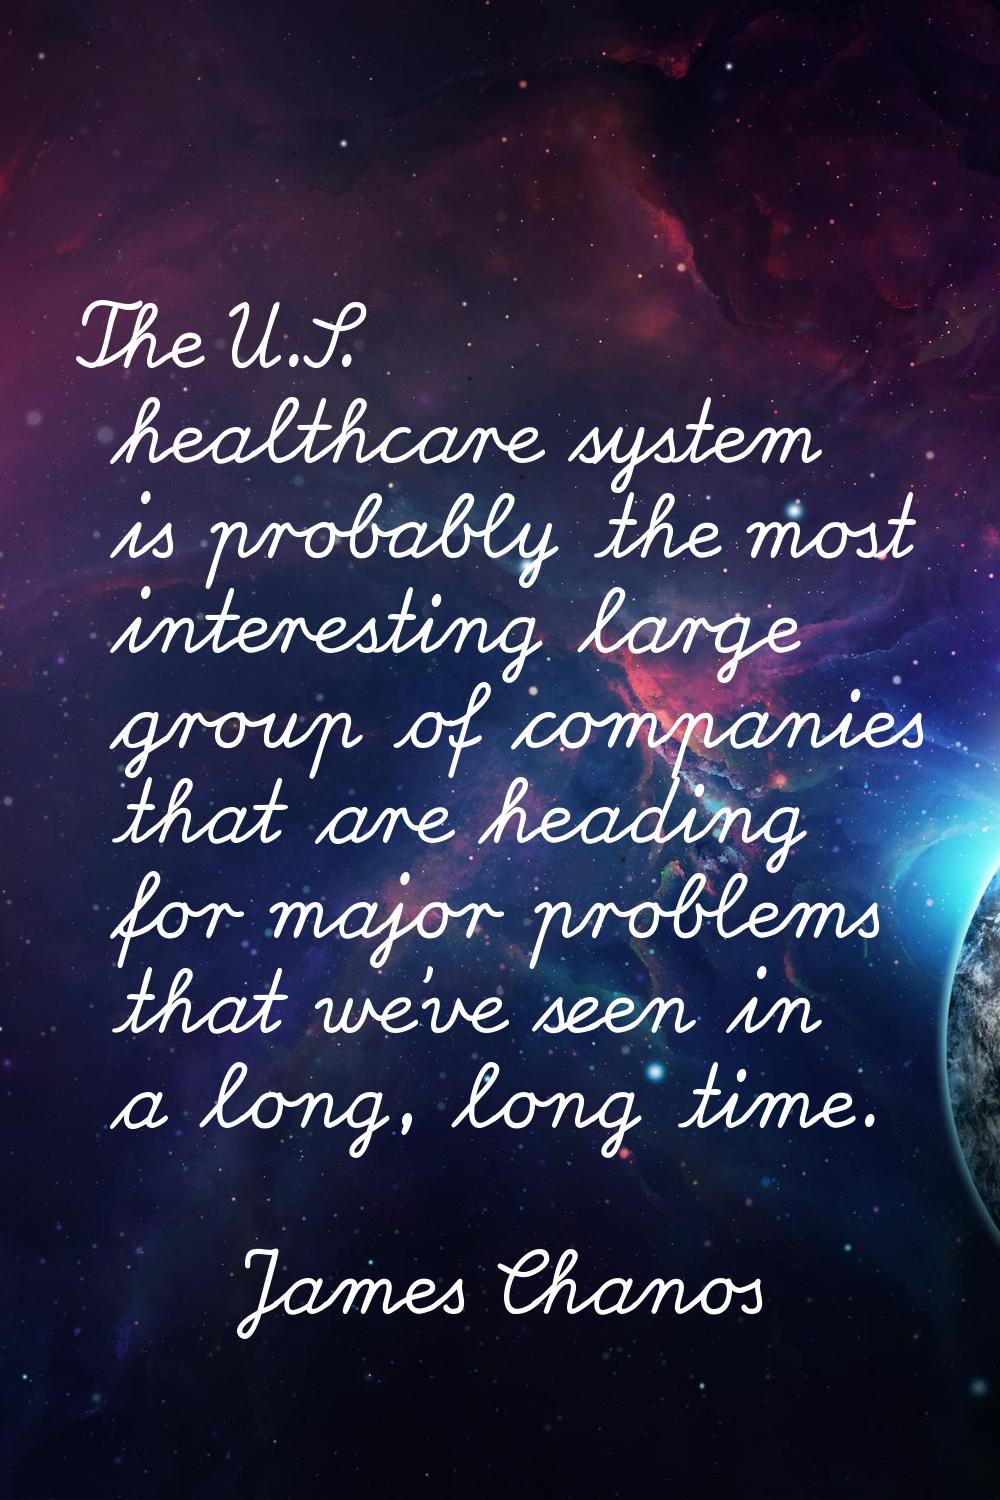 The U.S. healthcare system is probably the most interesting large group of companies that are headi